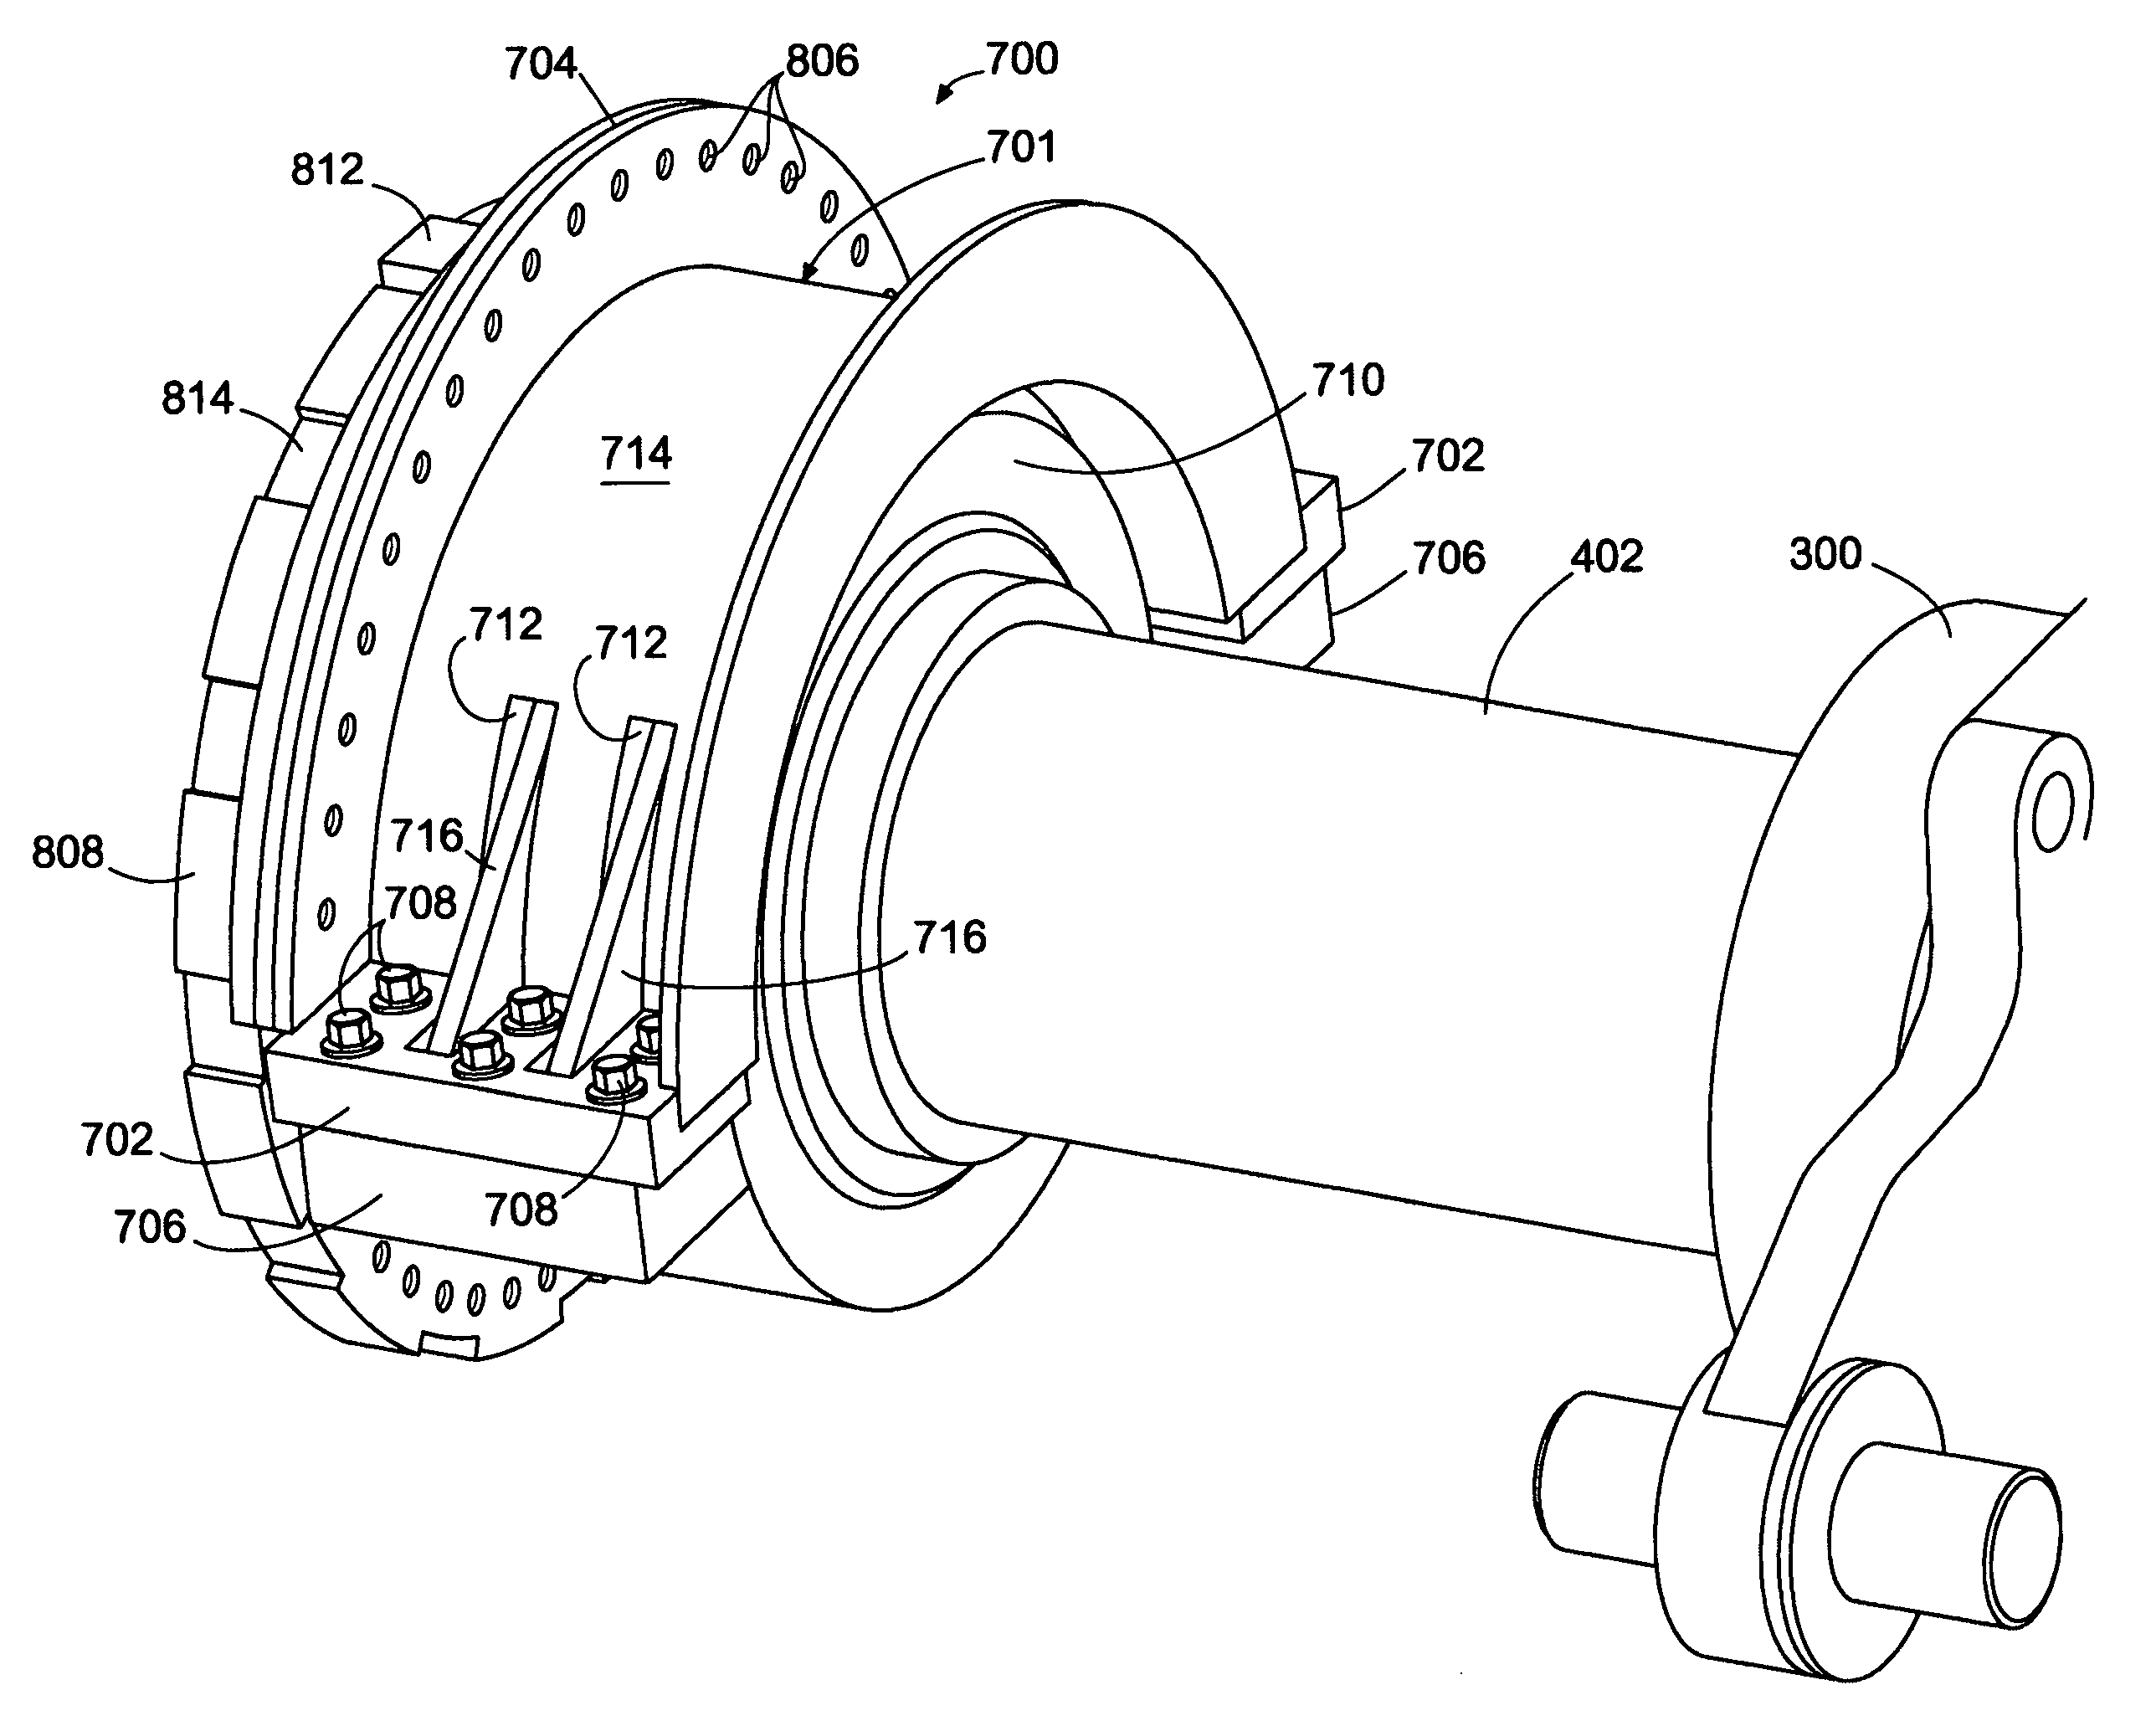 Methods and apparatus for replacing objects on horizontal shafts in elevated locations